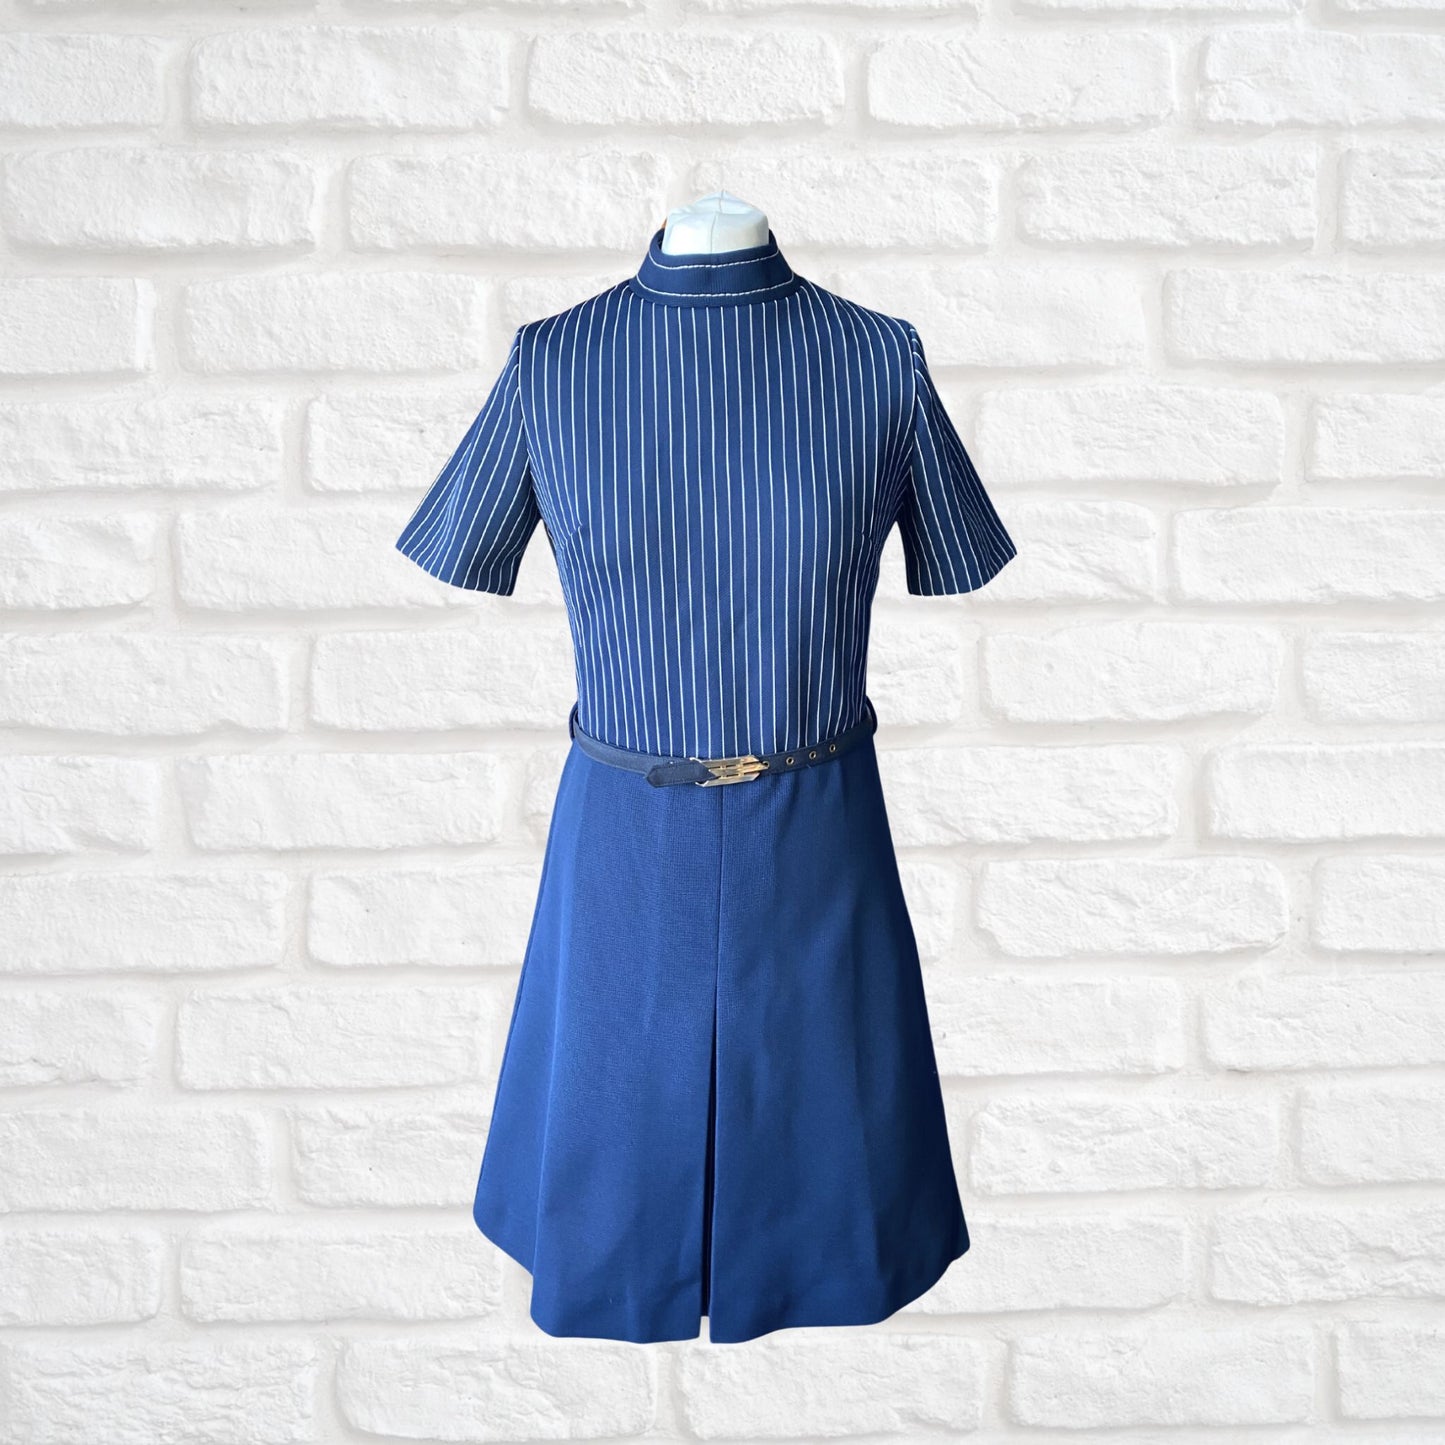 60s Vintage Mod Style Navy Blue and White Scooter Dress with Matching Belt. Approx UK size 8-10